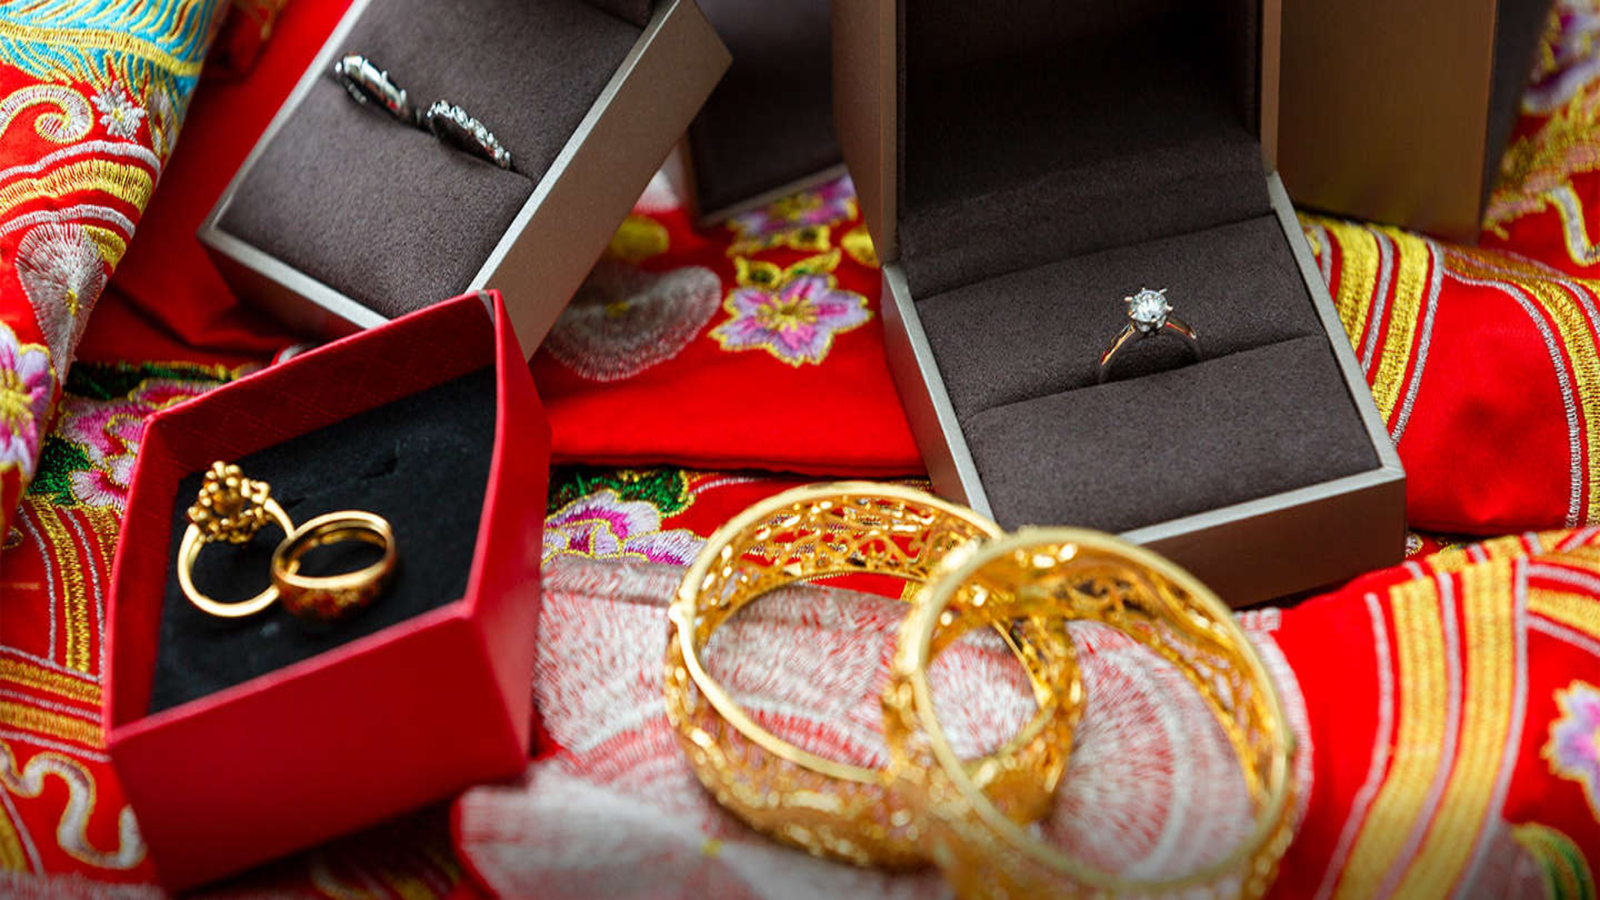 Gifts given to wife at time of marriage or before separation are non-returnable: court